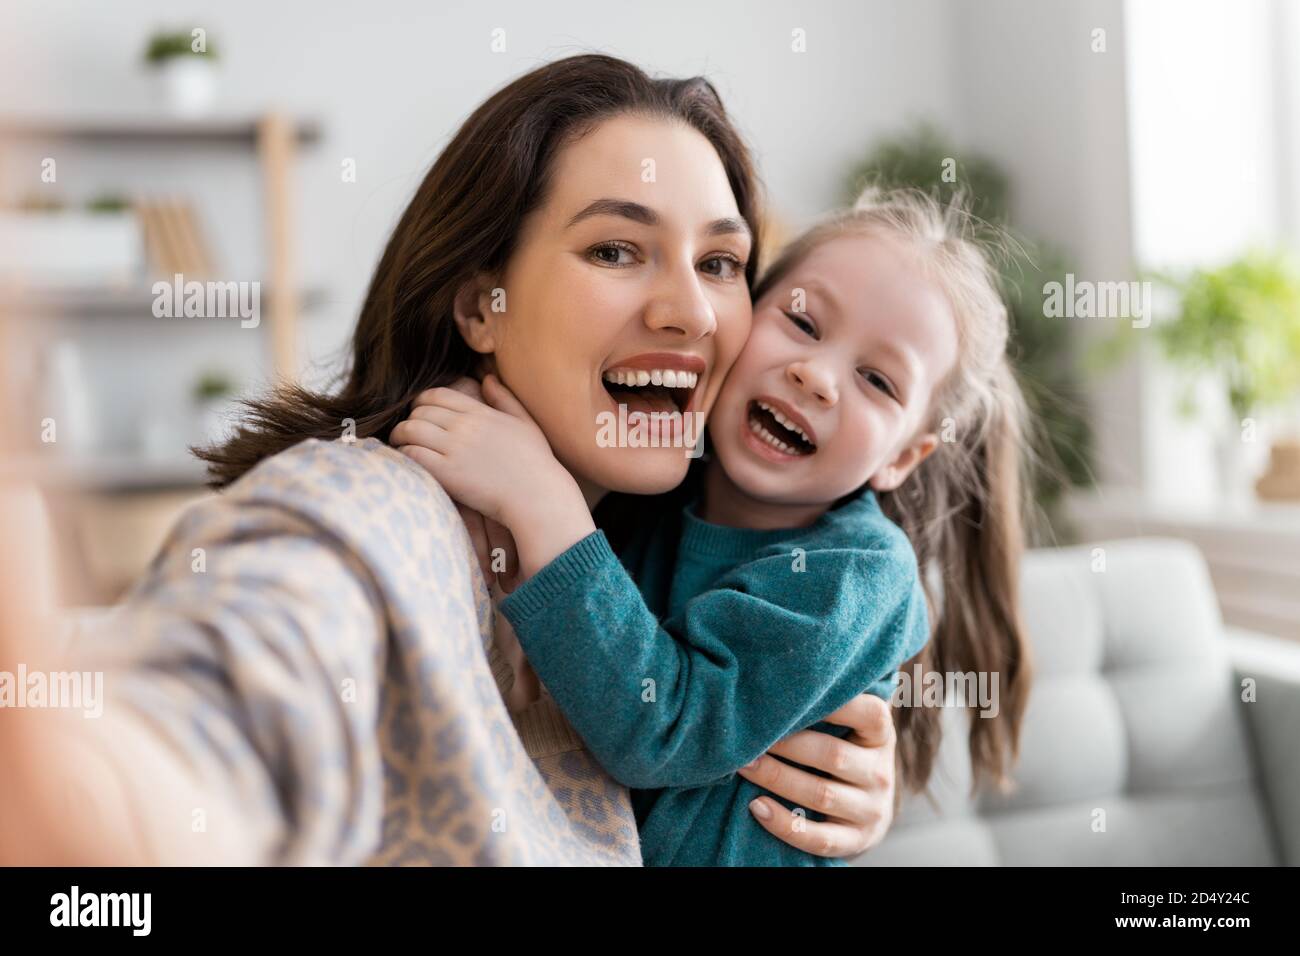 Happy loving family. Young mother and daughter girl using ...